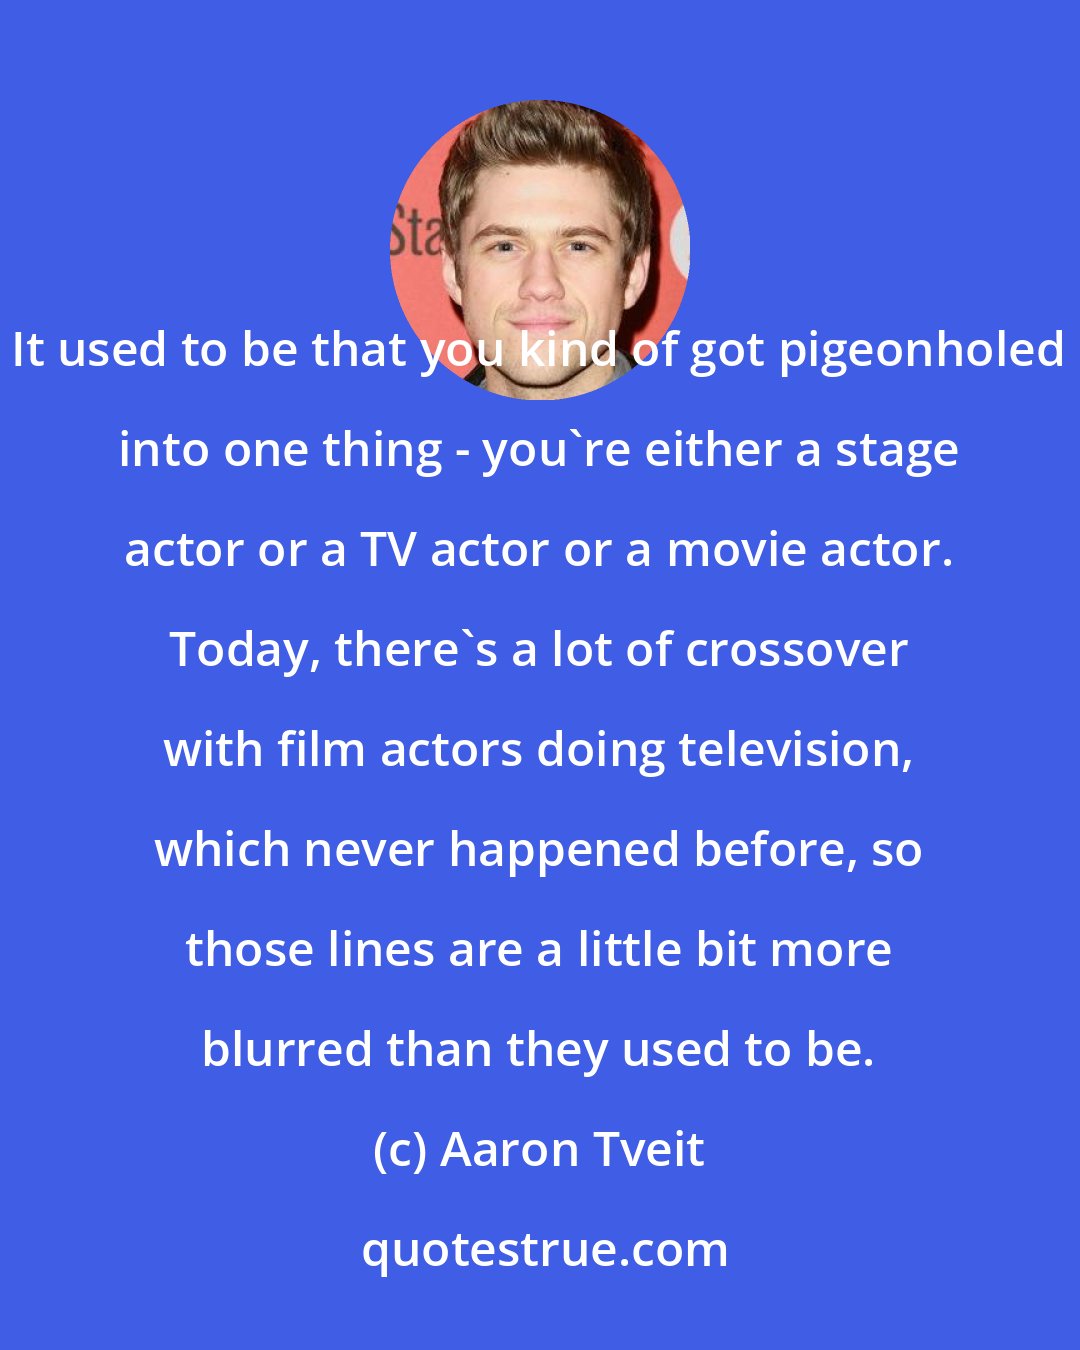 Aaron Tveit: It used to be that you kind of got pigeonholed into one thing - you're either a stage actor or a TV actor or a movie actor. Today, there's a lot of crossover with film actors doing television, which never happened before, so those lines are a little bit more blurred than they used to be.